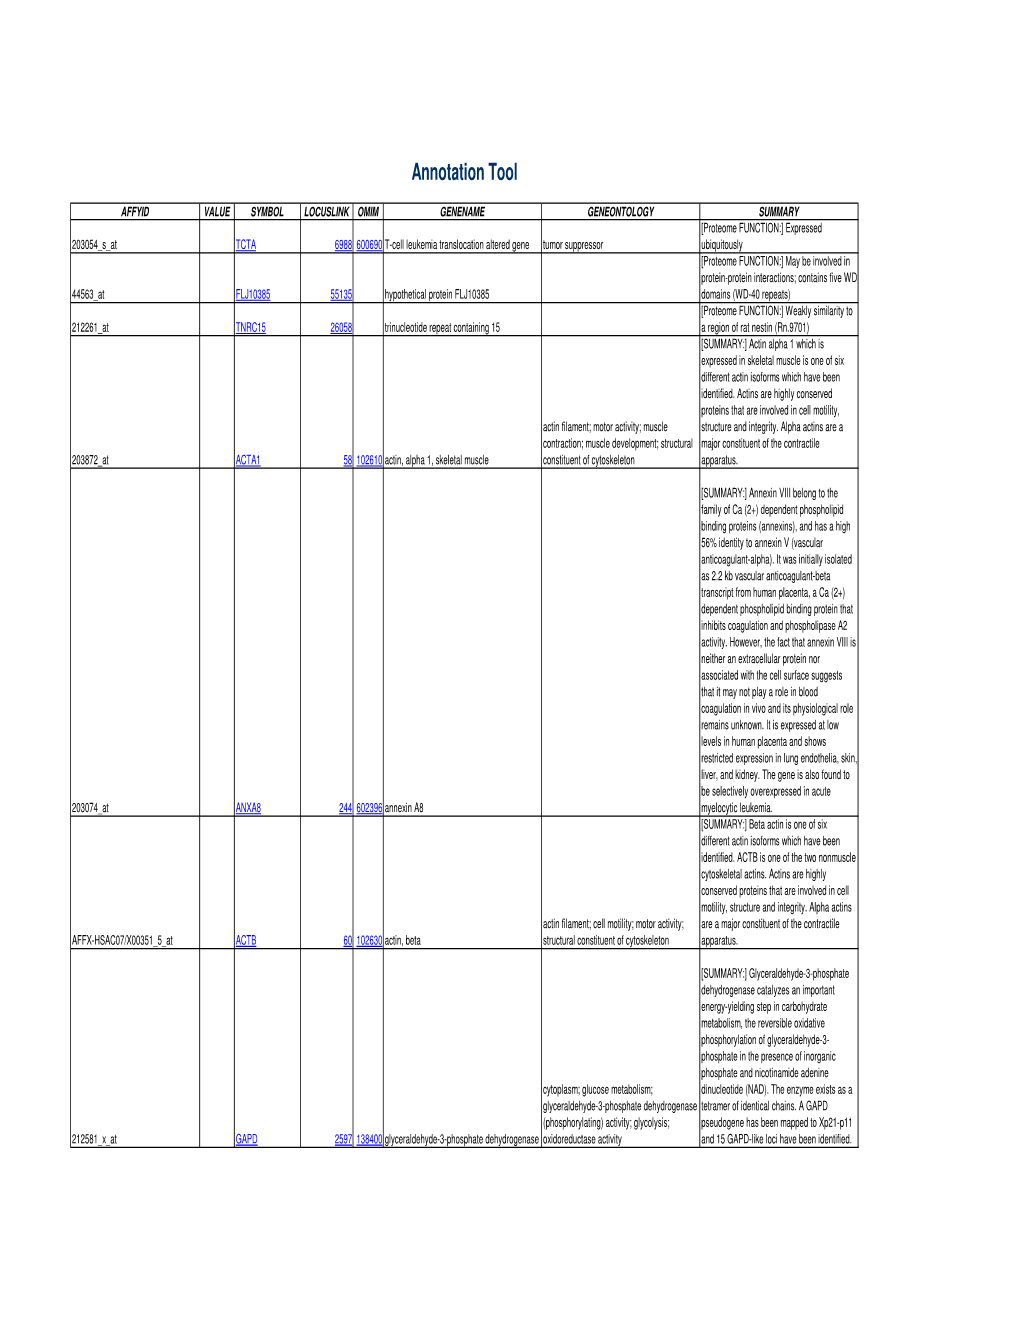 Supplementary Table 5. Functional Annotation of the Largest Gene Cluster(221 Element)